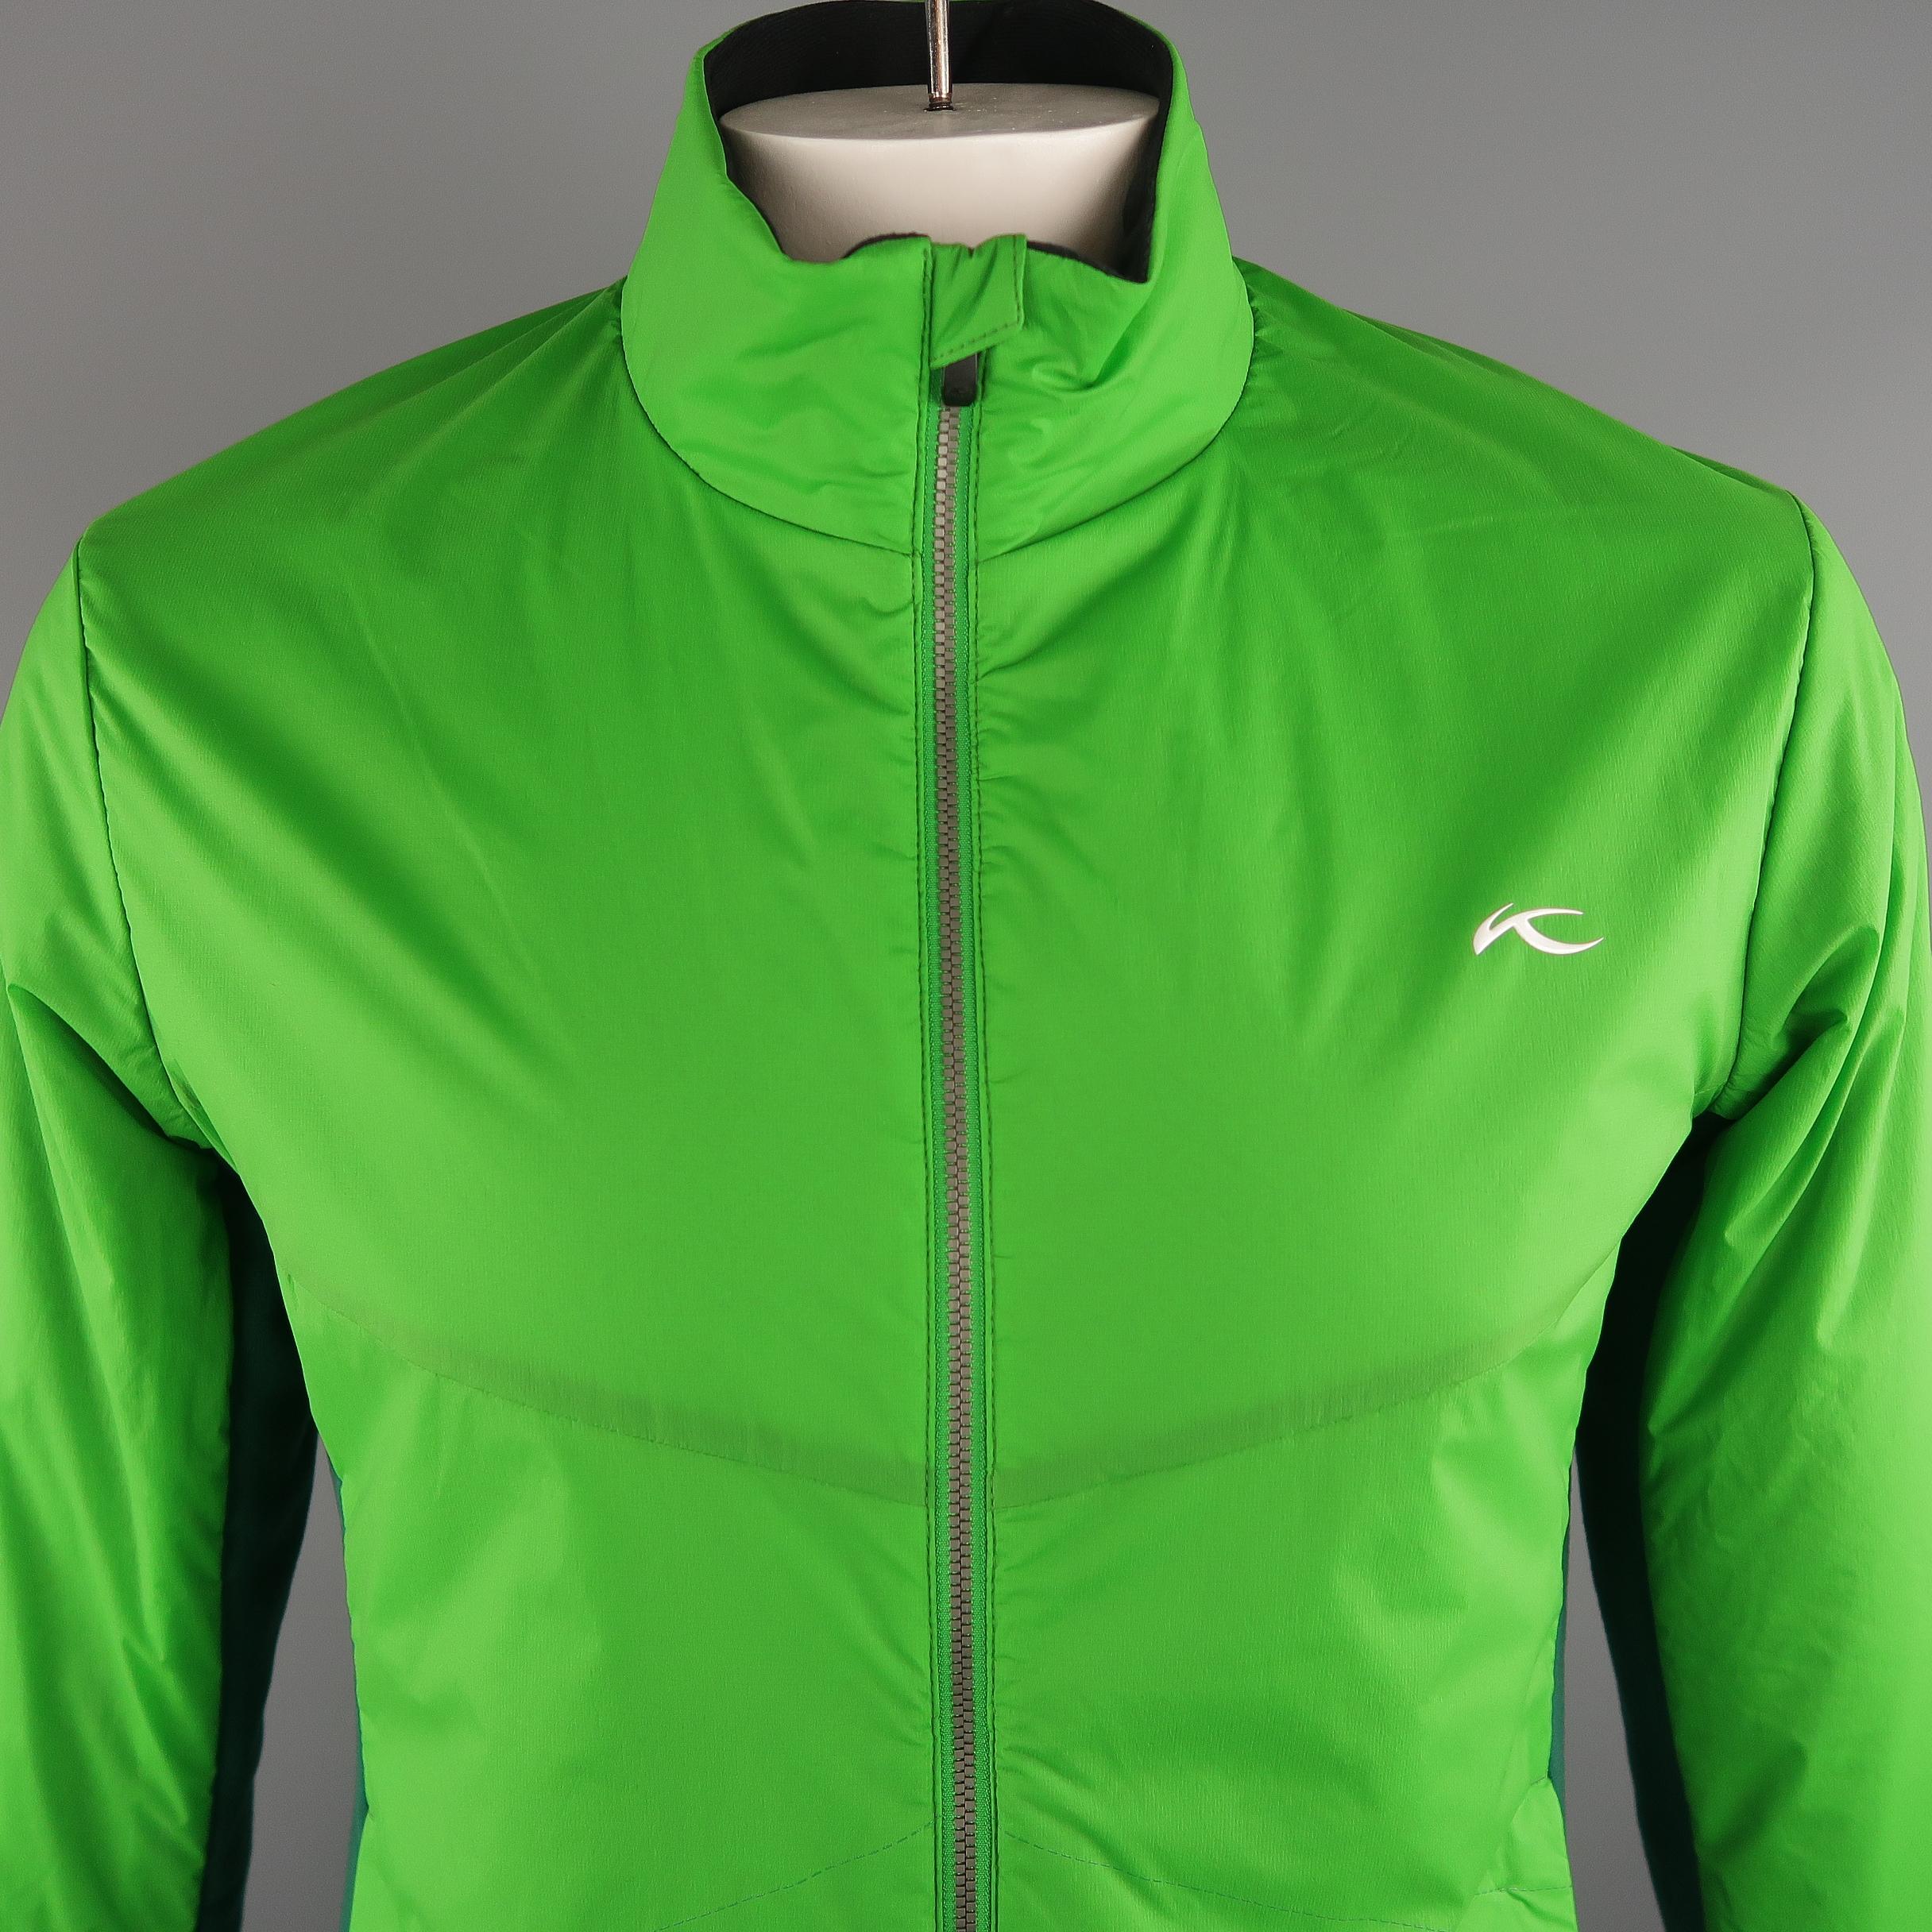 KJUS  jacket comes in a light weight green polyamide material and features a lateral elastane padding , zip up, slit pockets.
 
New with Tags.
Marked: 52 EU
 
Measurements:
 
Shoulder: 19 in.
Chest: 46 in.
Sleeve: 27.5 in.
Length: 29  in.